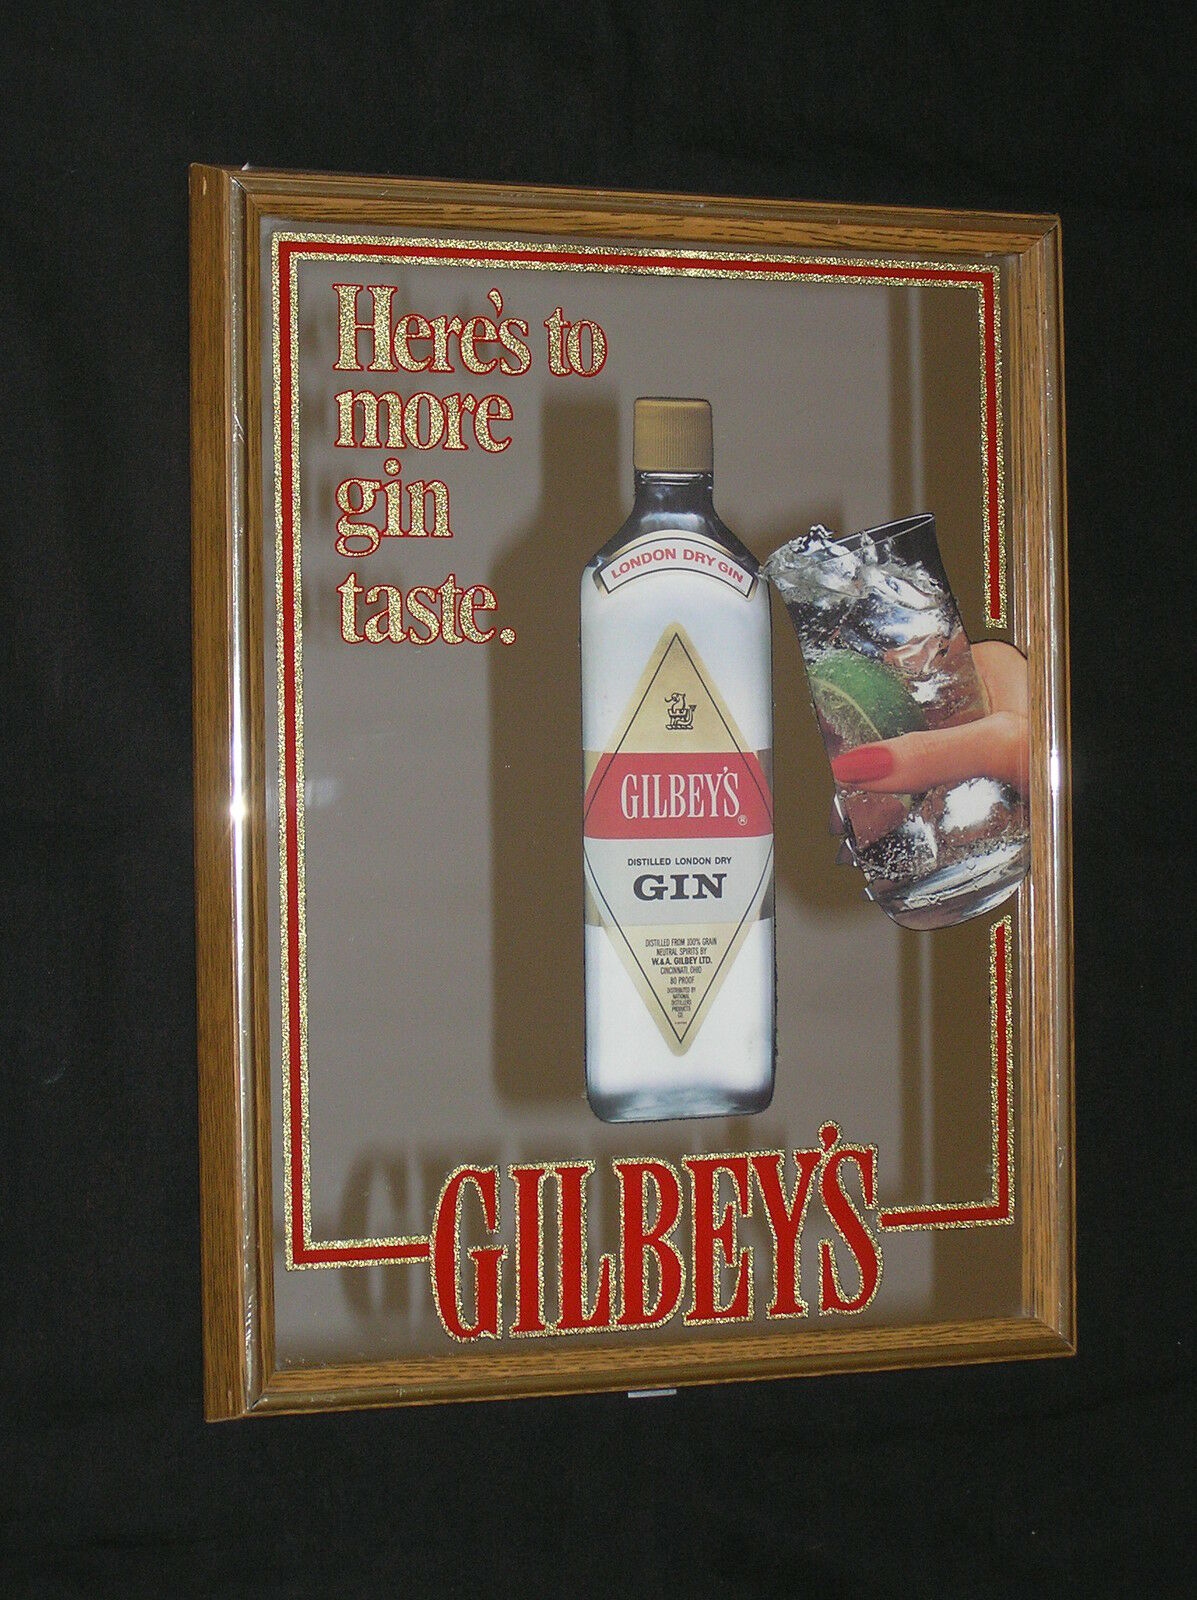 Gilbey's Heres To More Gin Taste Mirror Signage Sign Picture 17 1/4" X 13 1/4"